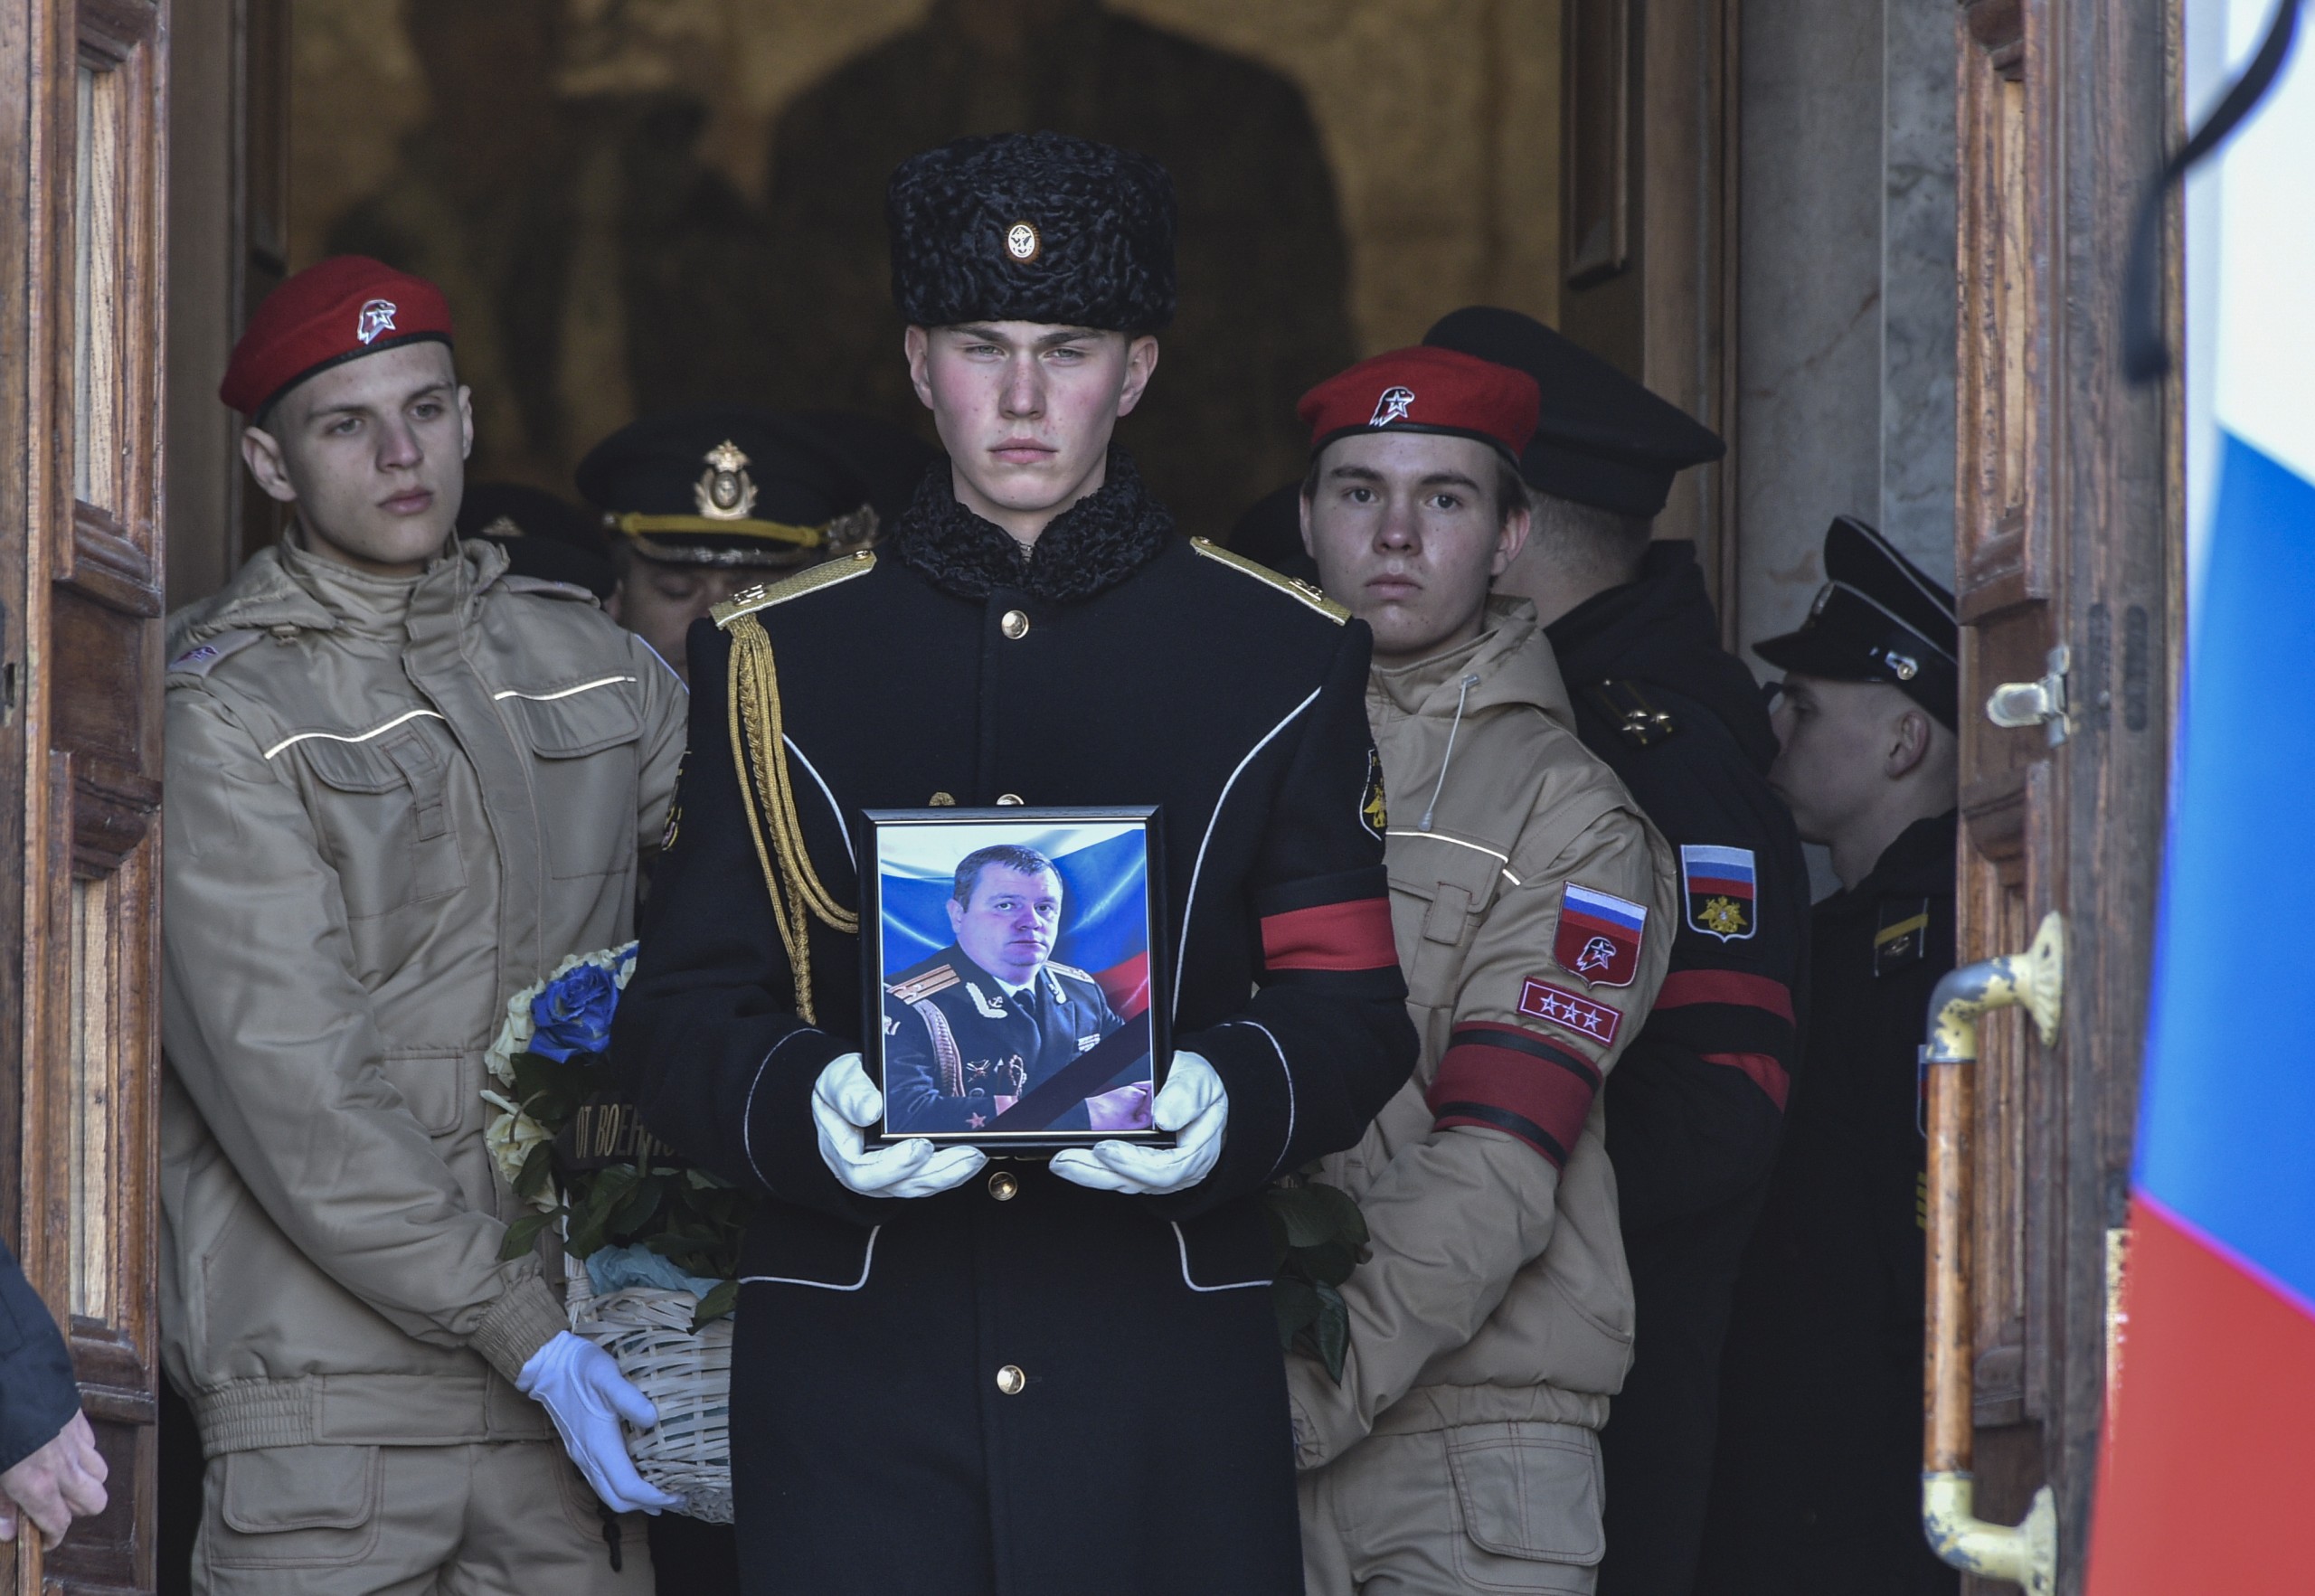 epa09844953 Russian sailors carry a coffin and a photograph of the Deputy Commander of the Black Sea Fleet for Military-Political Work (VPR), Captain 1st Rank Andrei Paly, who was killed in the recent battles of Mariupol, during a farewell ceremony in Sevastopol, Crimea, 23 March 2022. On 24 February Russian troops had entered Ukrainian territory in what the Russian president declared a 'special military operation', resulting in fighting and destruction in the country, a huge flow of refugees, and multiple sanctions against Russia.  EPA/STRINGER